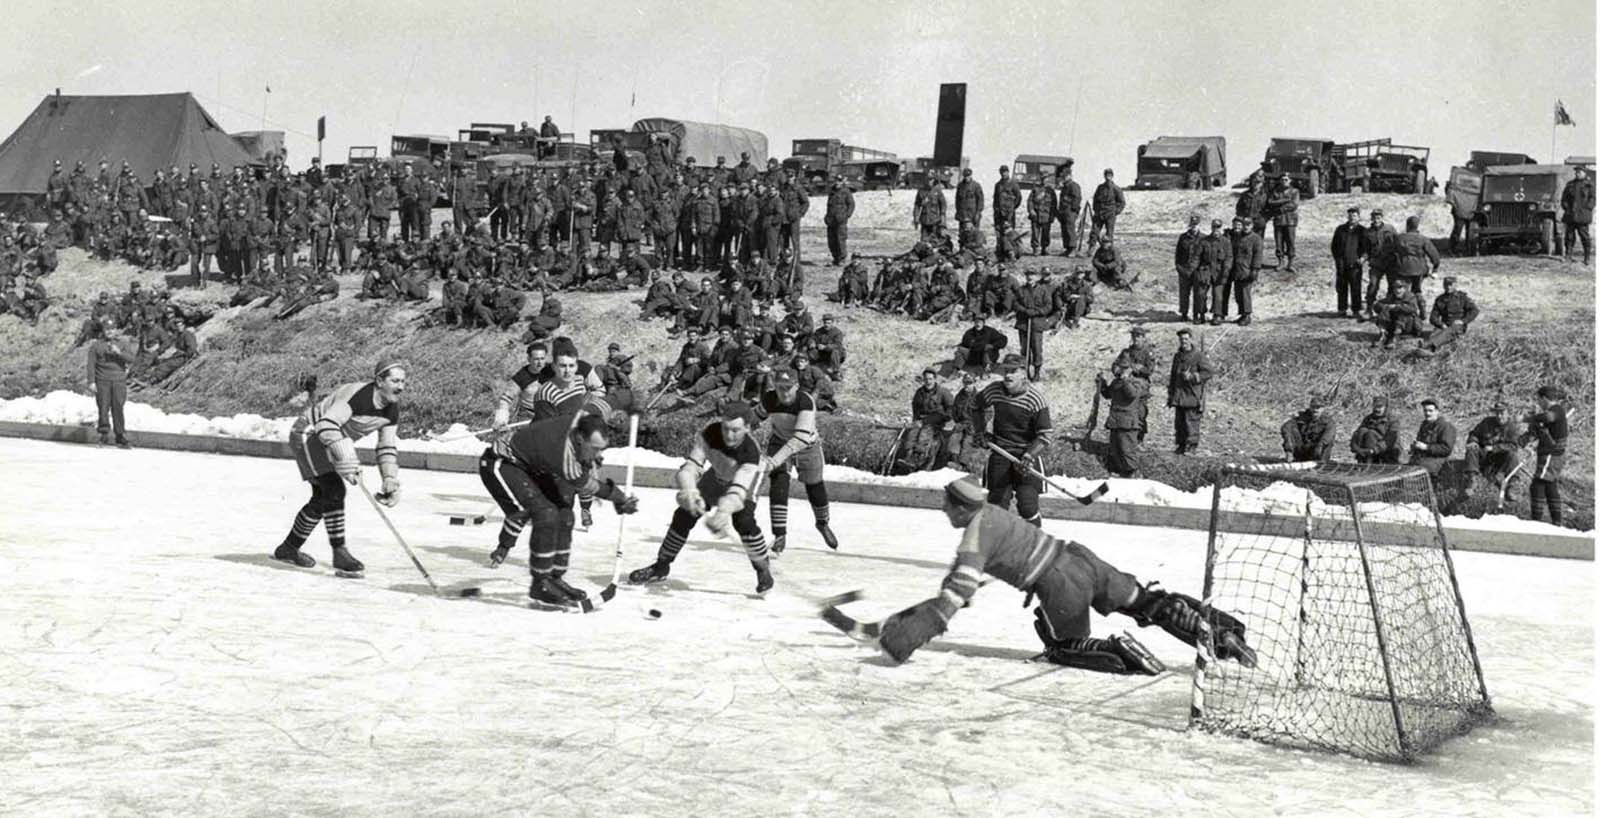 Many of these troops were surprised to find in Korea a climate not much different from that which they had left in Canada, with cold winters meaning frozen rivers where they could play their favourite sport.